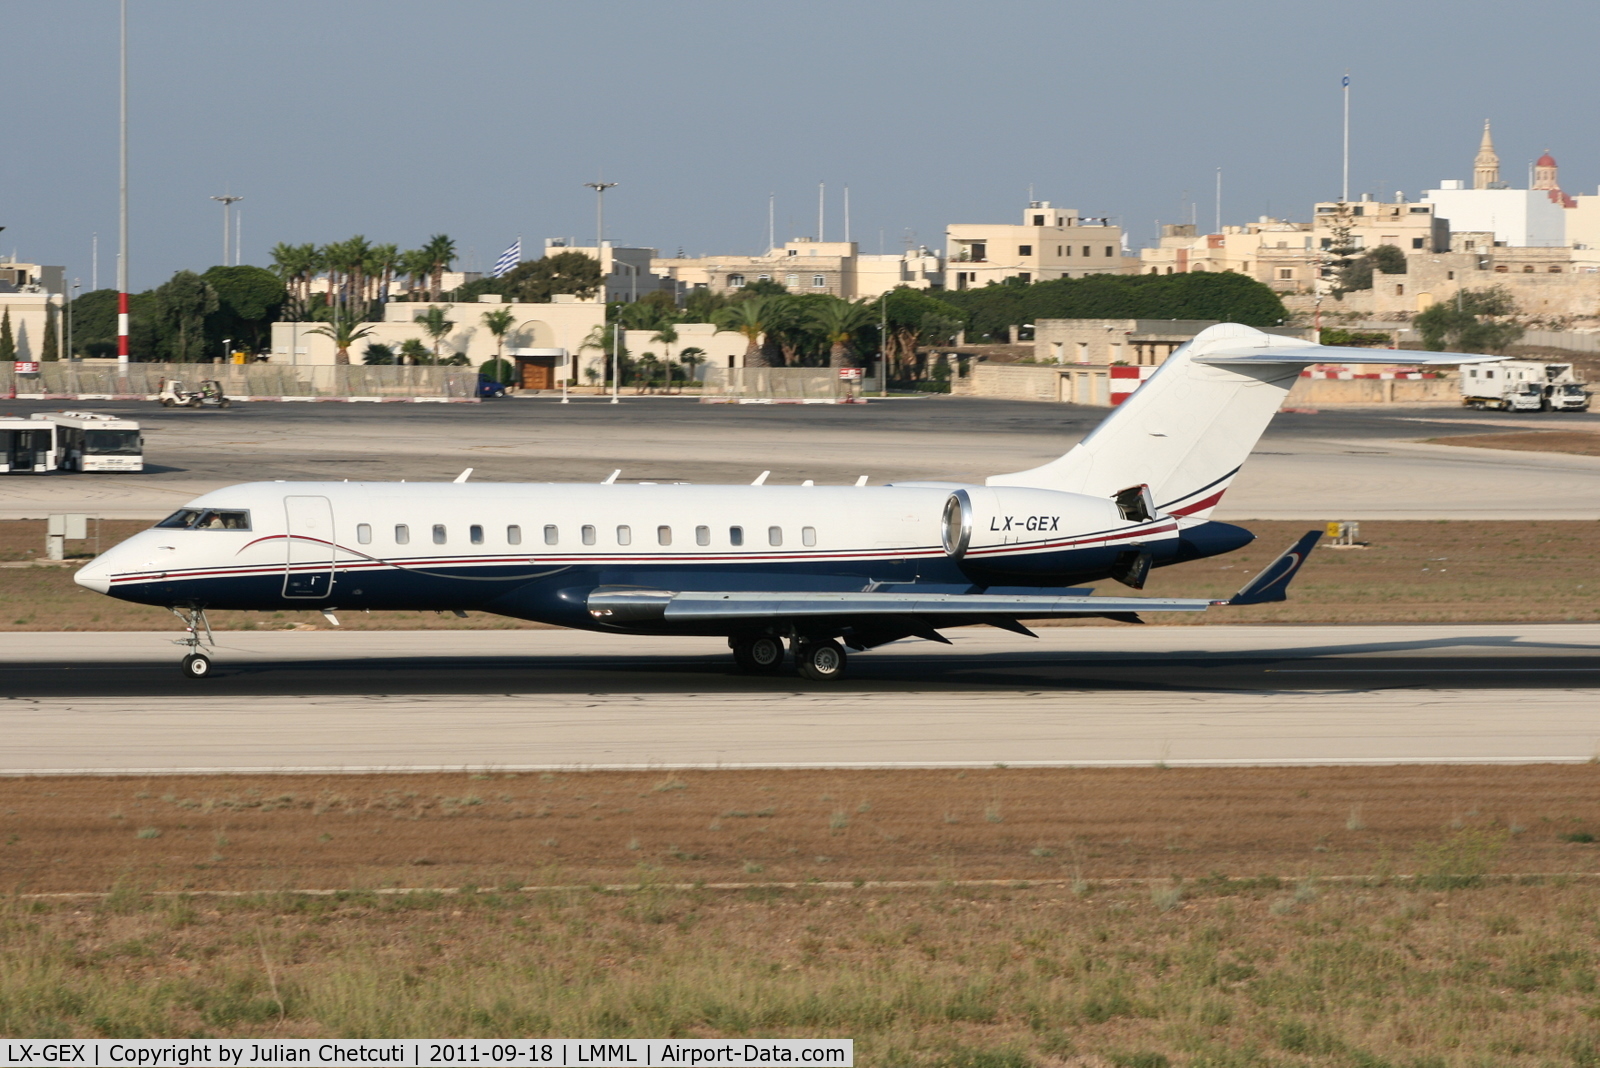 LX-GEX, 1998 Bombardier BD-700-1A10 Global Express C/N 9013, Landing Runway 31. This Bombardier brought Libyan Delegation on an unexpected visit to Malta.